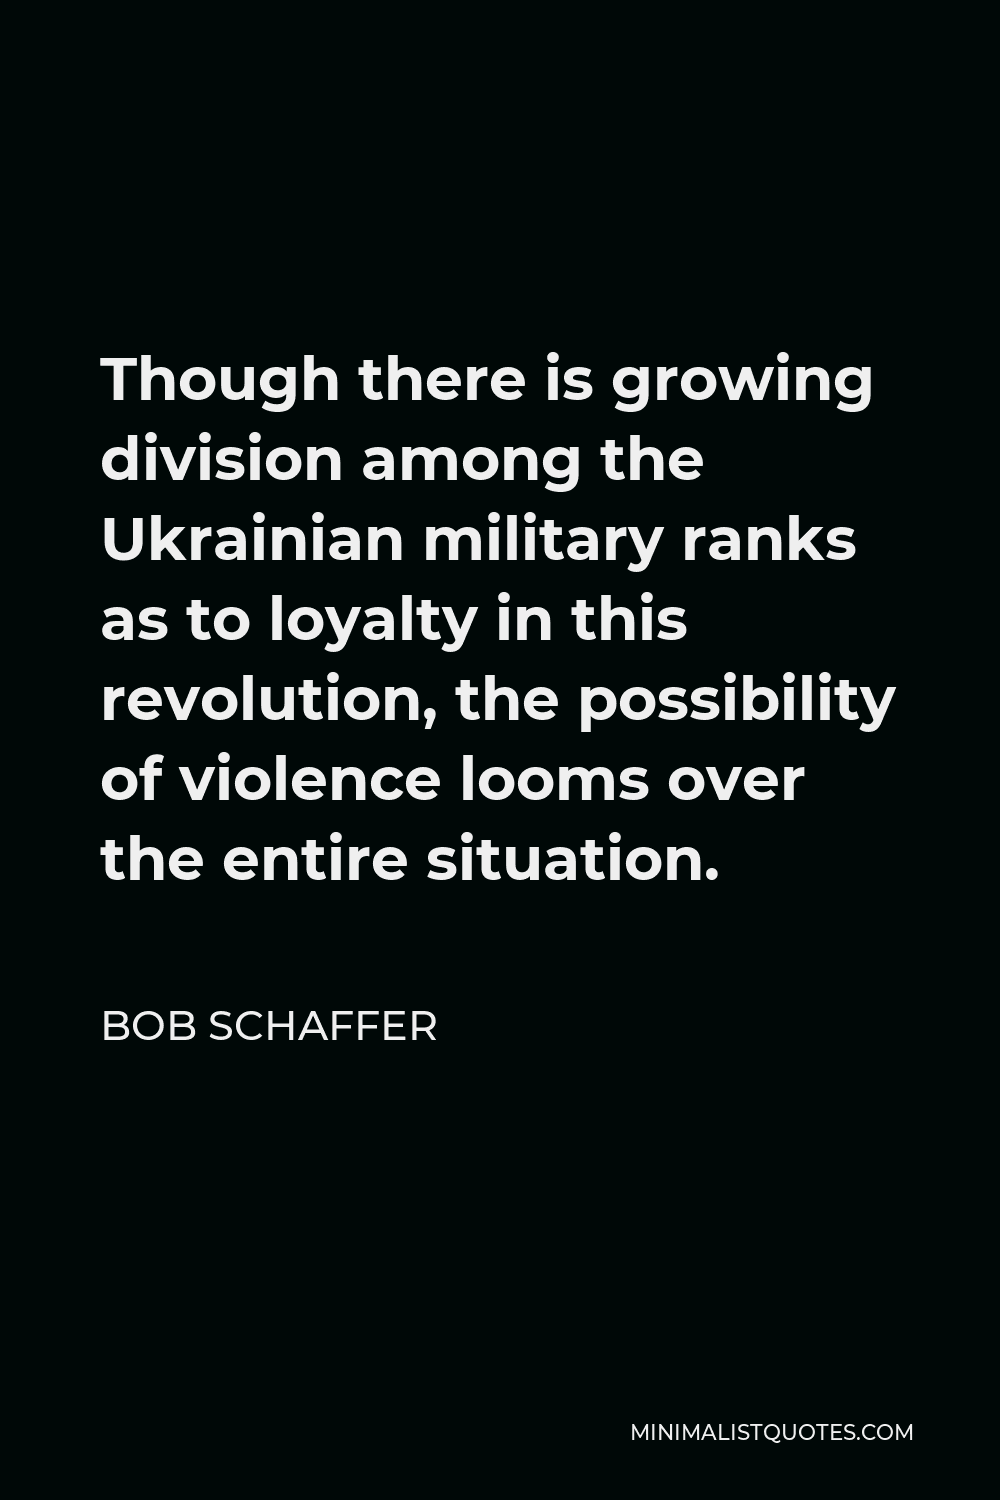 Bob Schaffer Quote - Though there is growing division among the Ukrainian military ranks as to loyalty in this revolution, the possibility of violence looms over the entire situation.